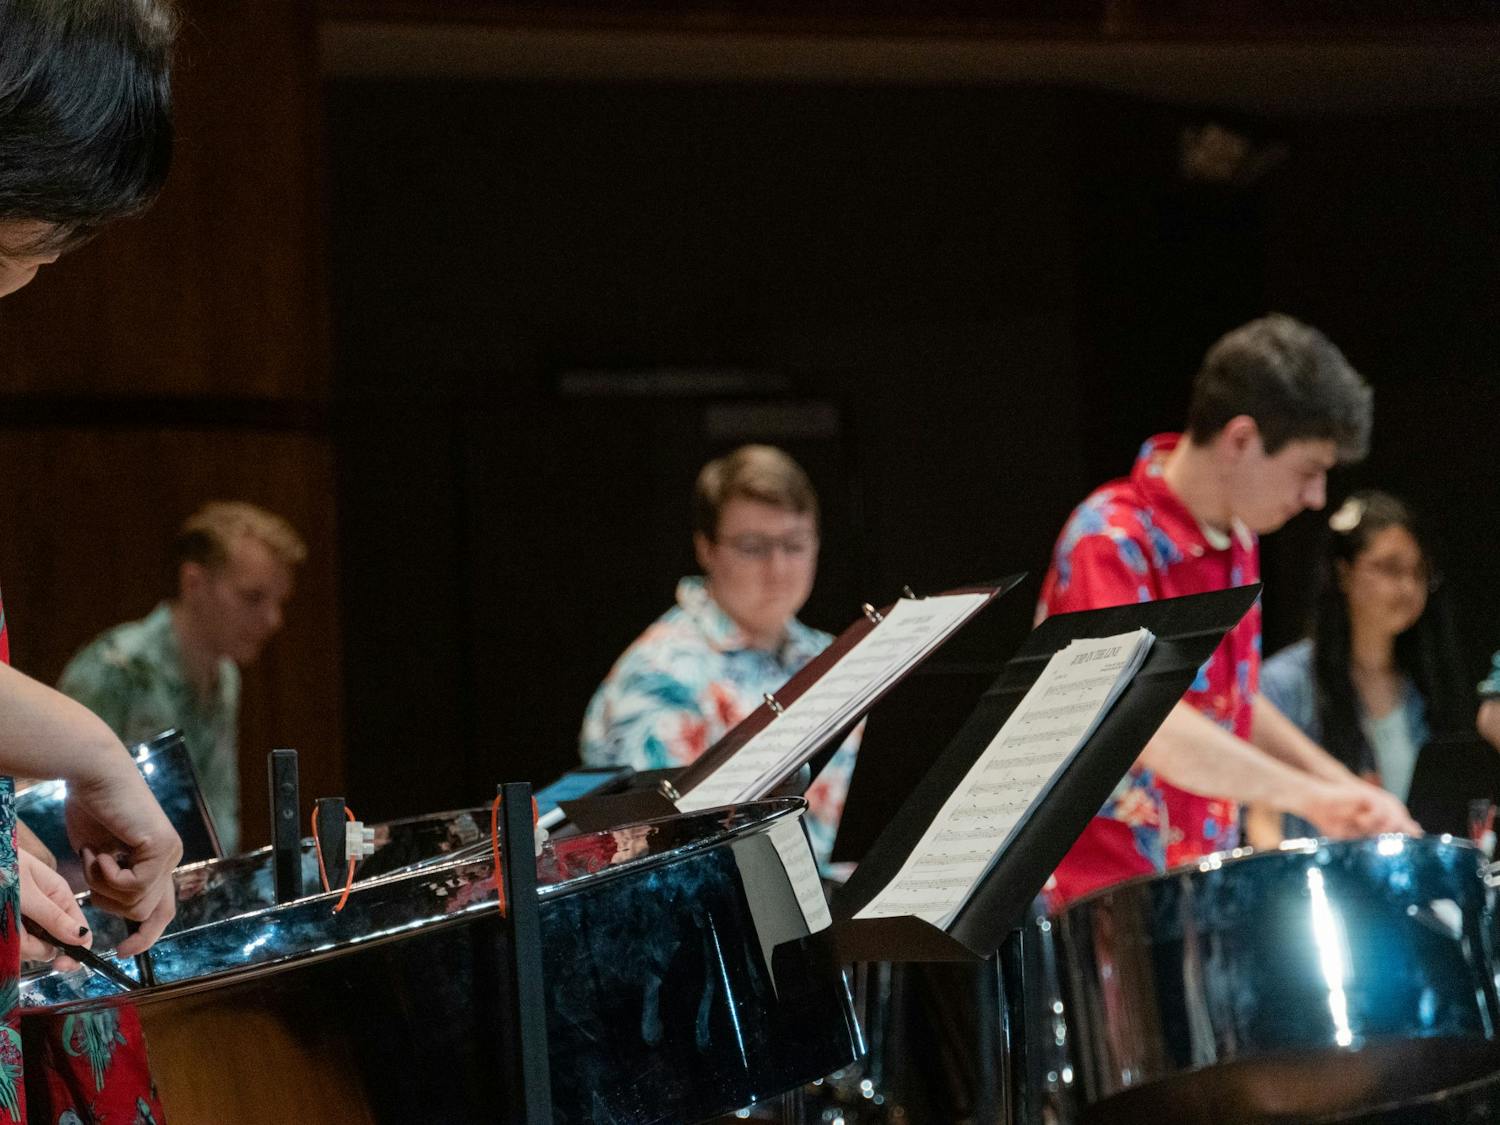 The Palmetto Pans bang against steel pan drums during a concert at the USC School of Music Tuesday evening, April 5, 2022. The music group composed of USC students performed a variety of songs most of which were island compositions from Trinidad and Tobago.